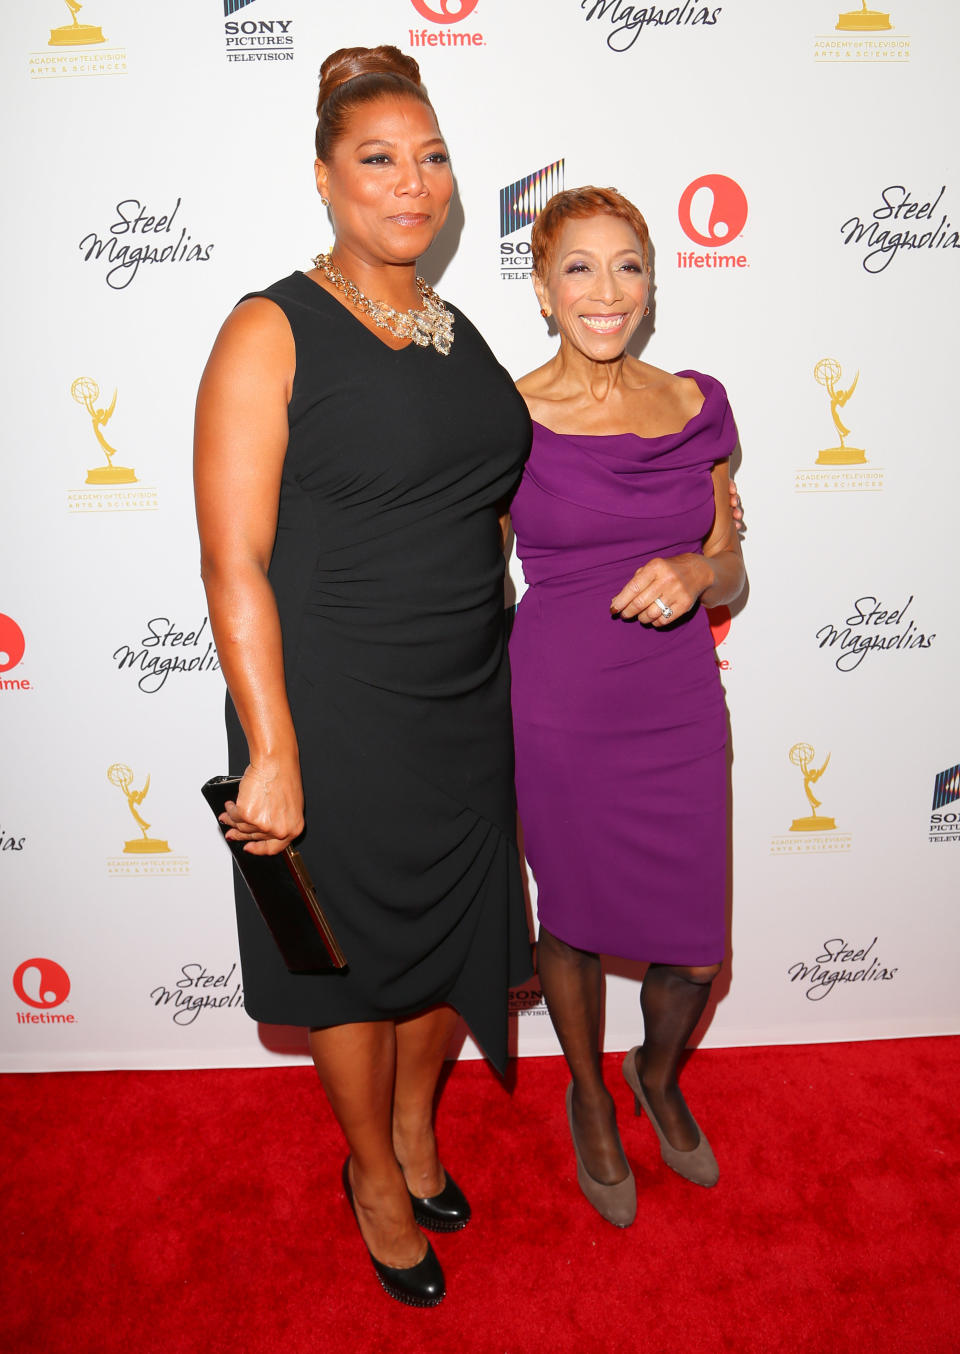 Queen Latifah and her mother, Rita Owens, attend the "Steel Magnolias" premiere at the Paris Theatre on Oct. 3, 2012 in NYC.&nbsp; (Photo: Charles Norfleet via Getty Images)